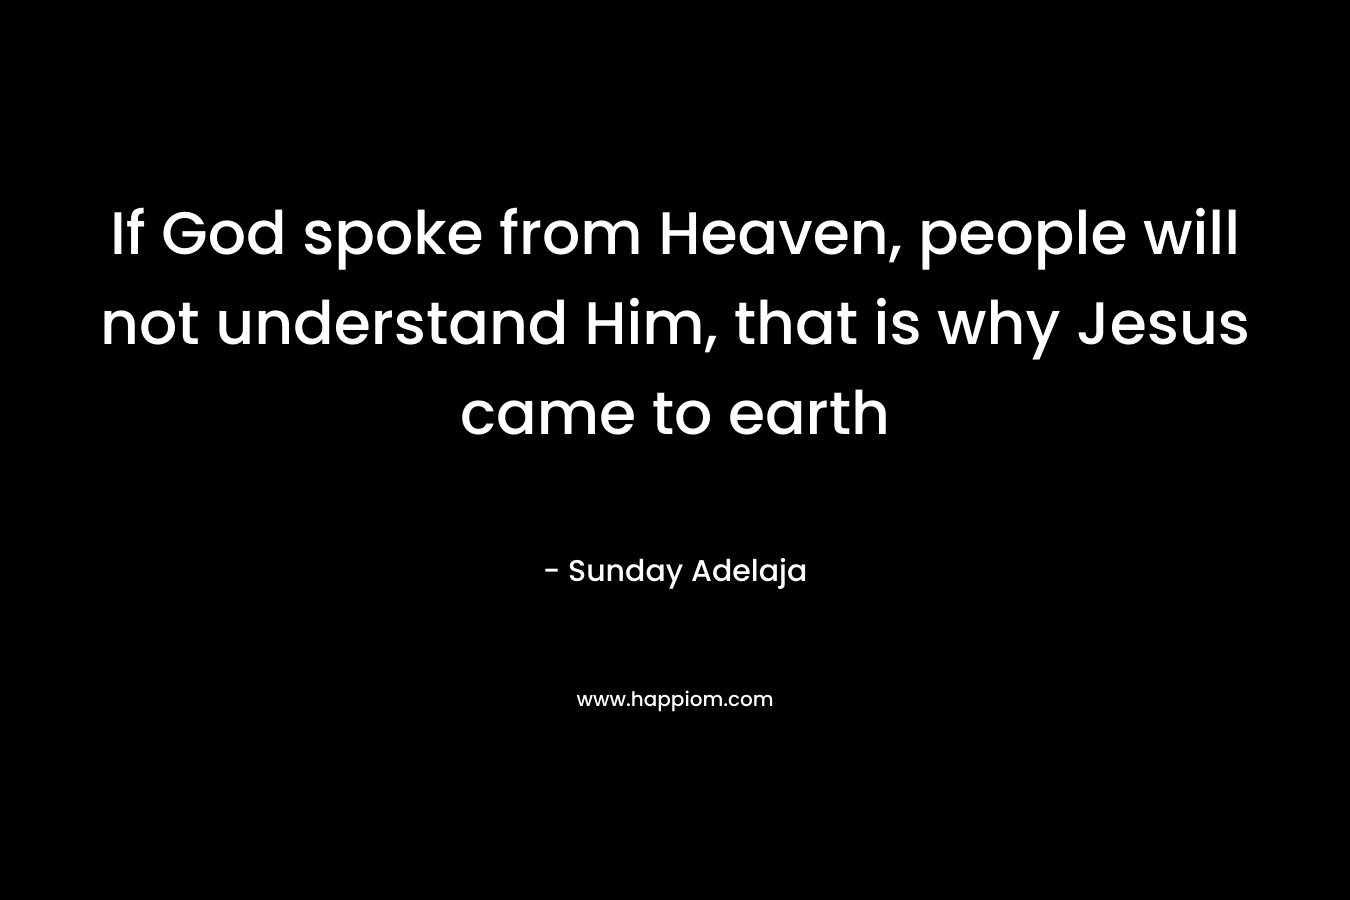 If God spoke from Heaven, people will not understand Him, that is why Jesus came to earth